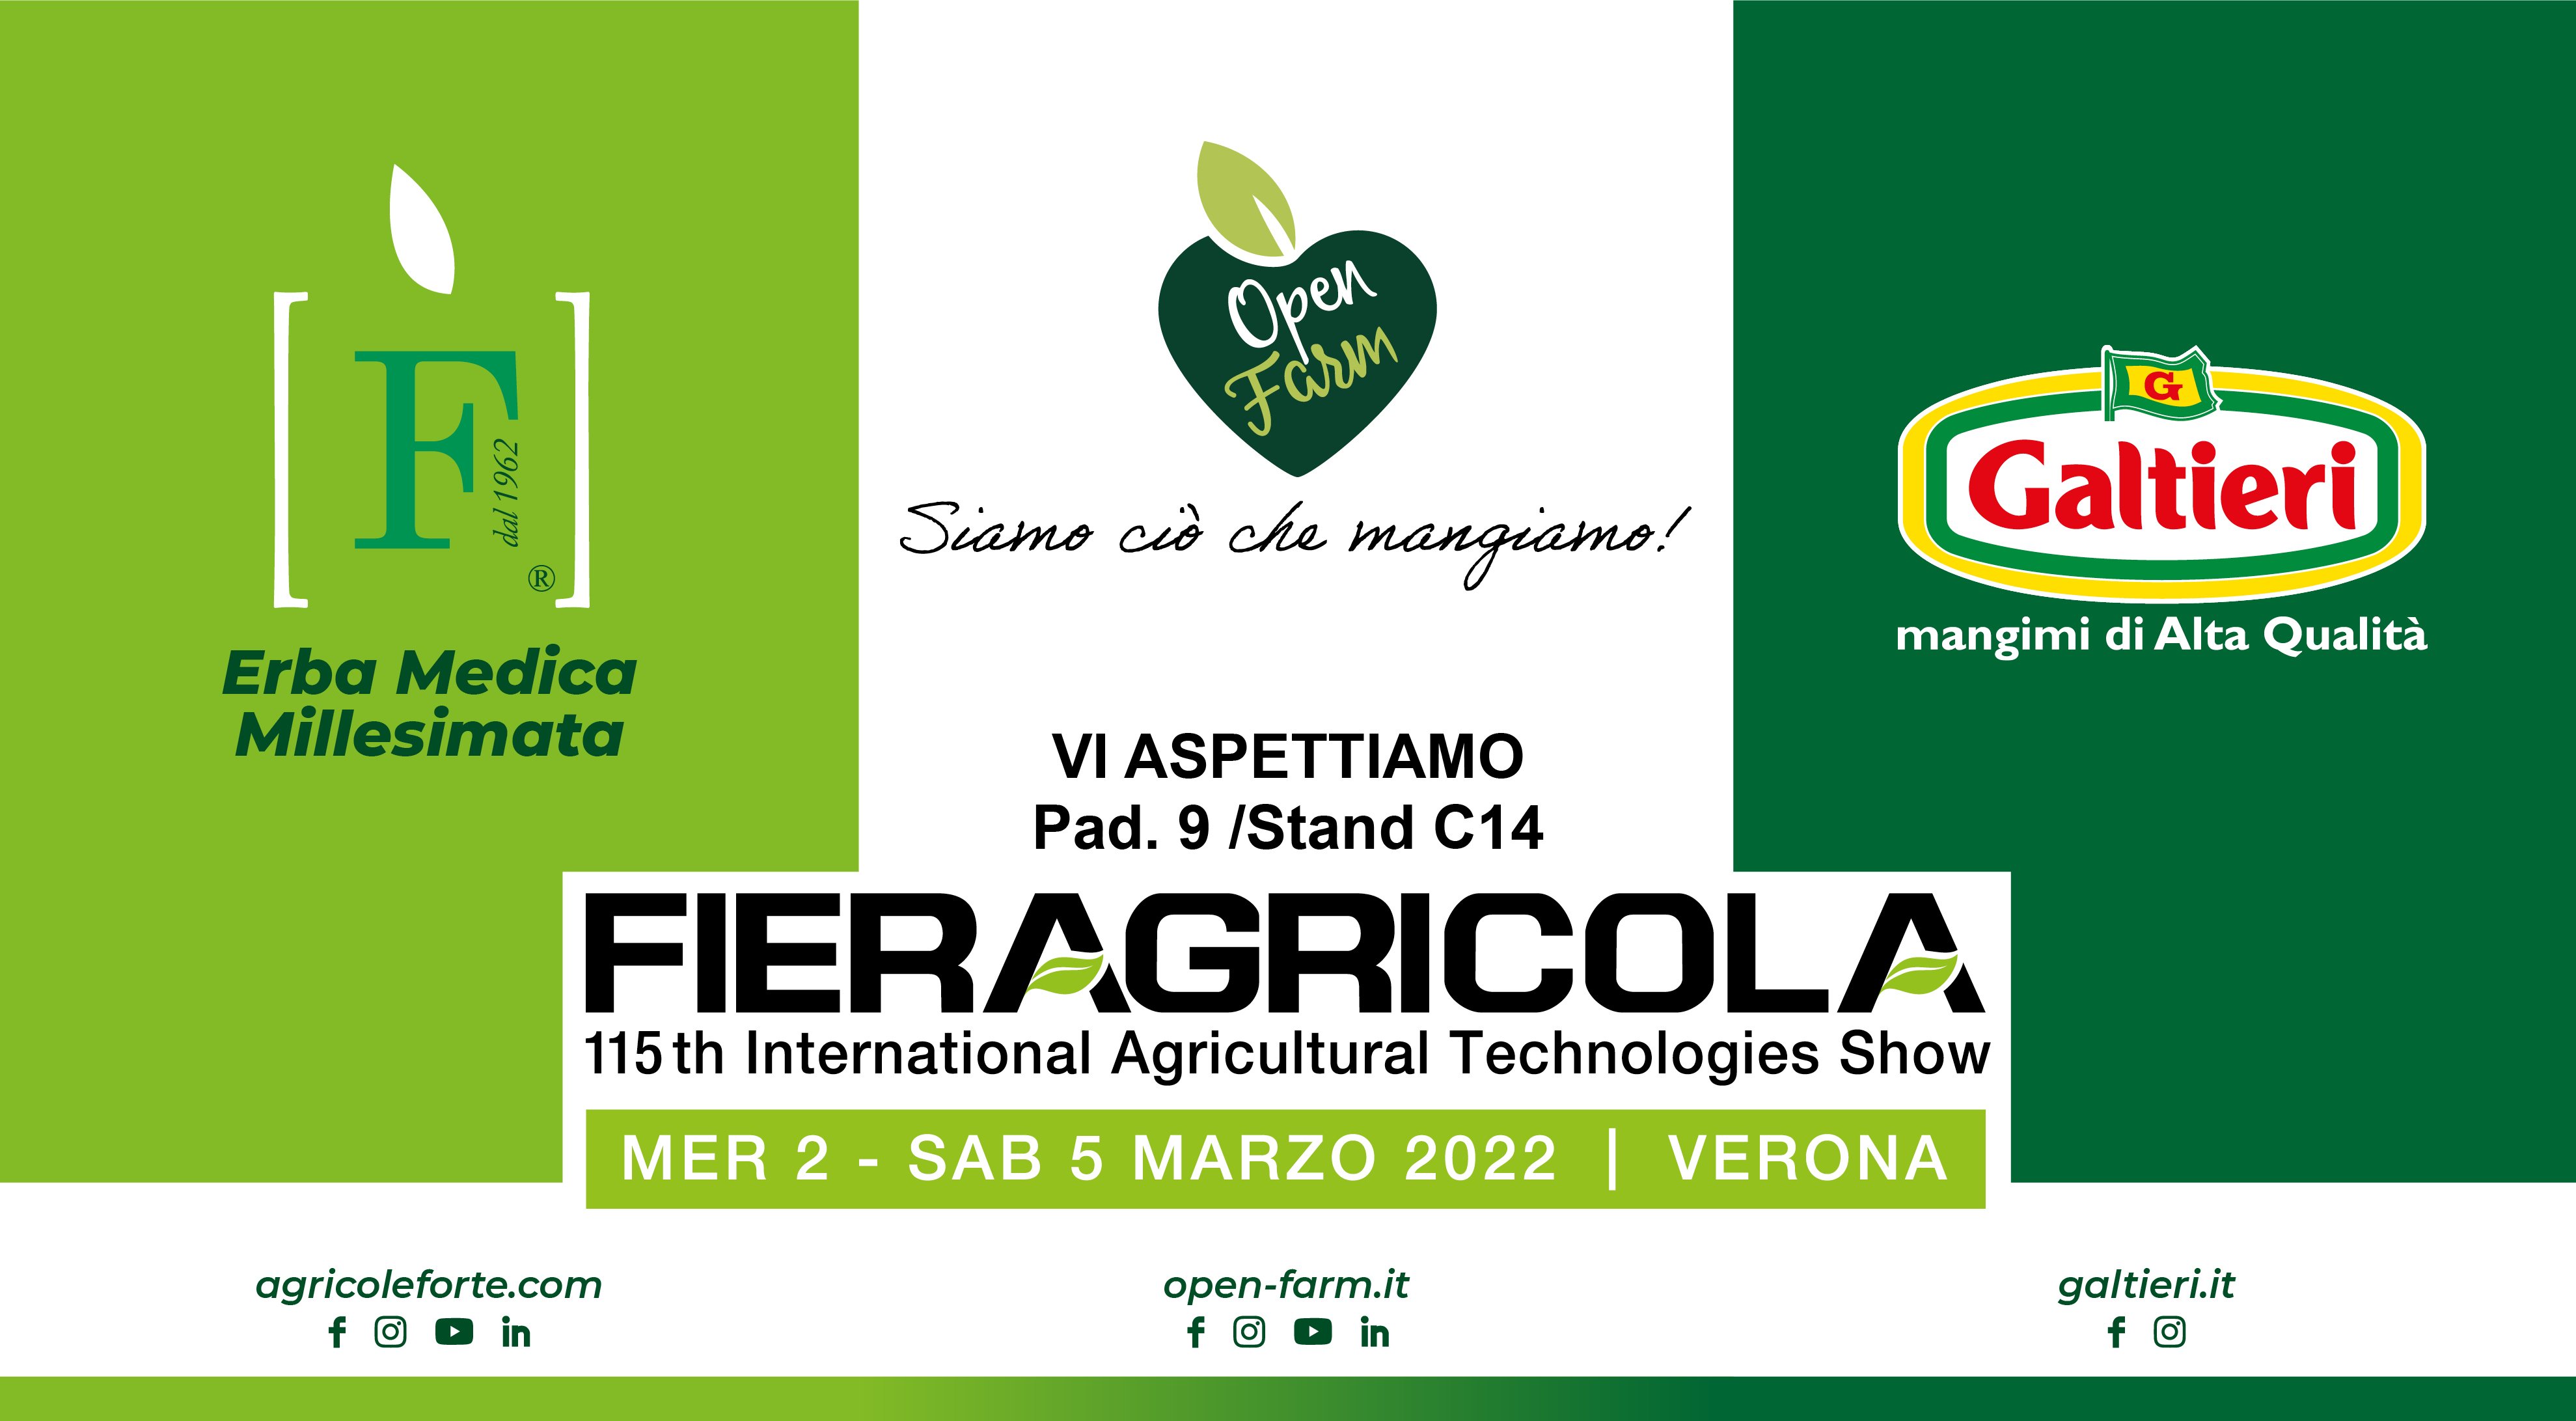 Fiera Agricola Verona - from 2 to 5 march 2022